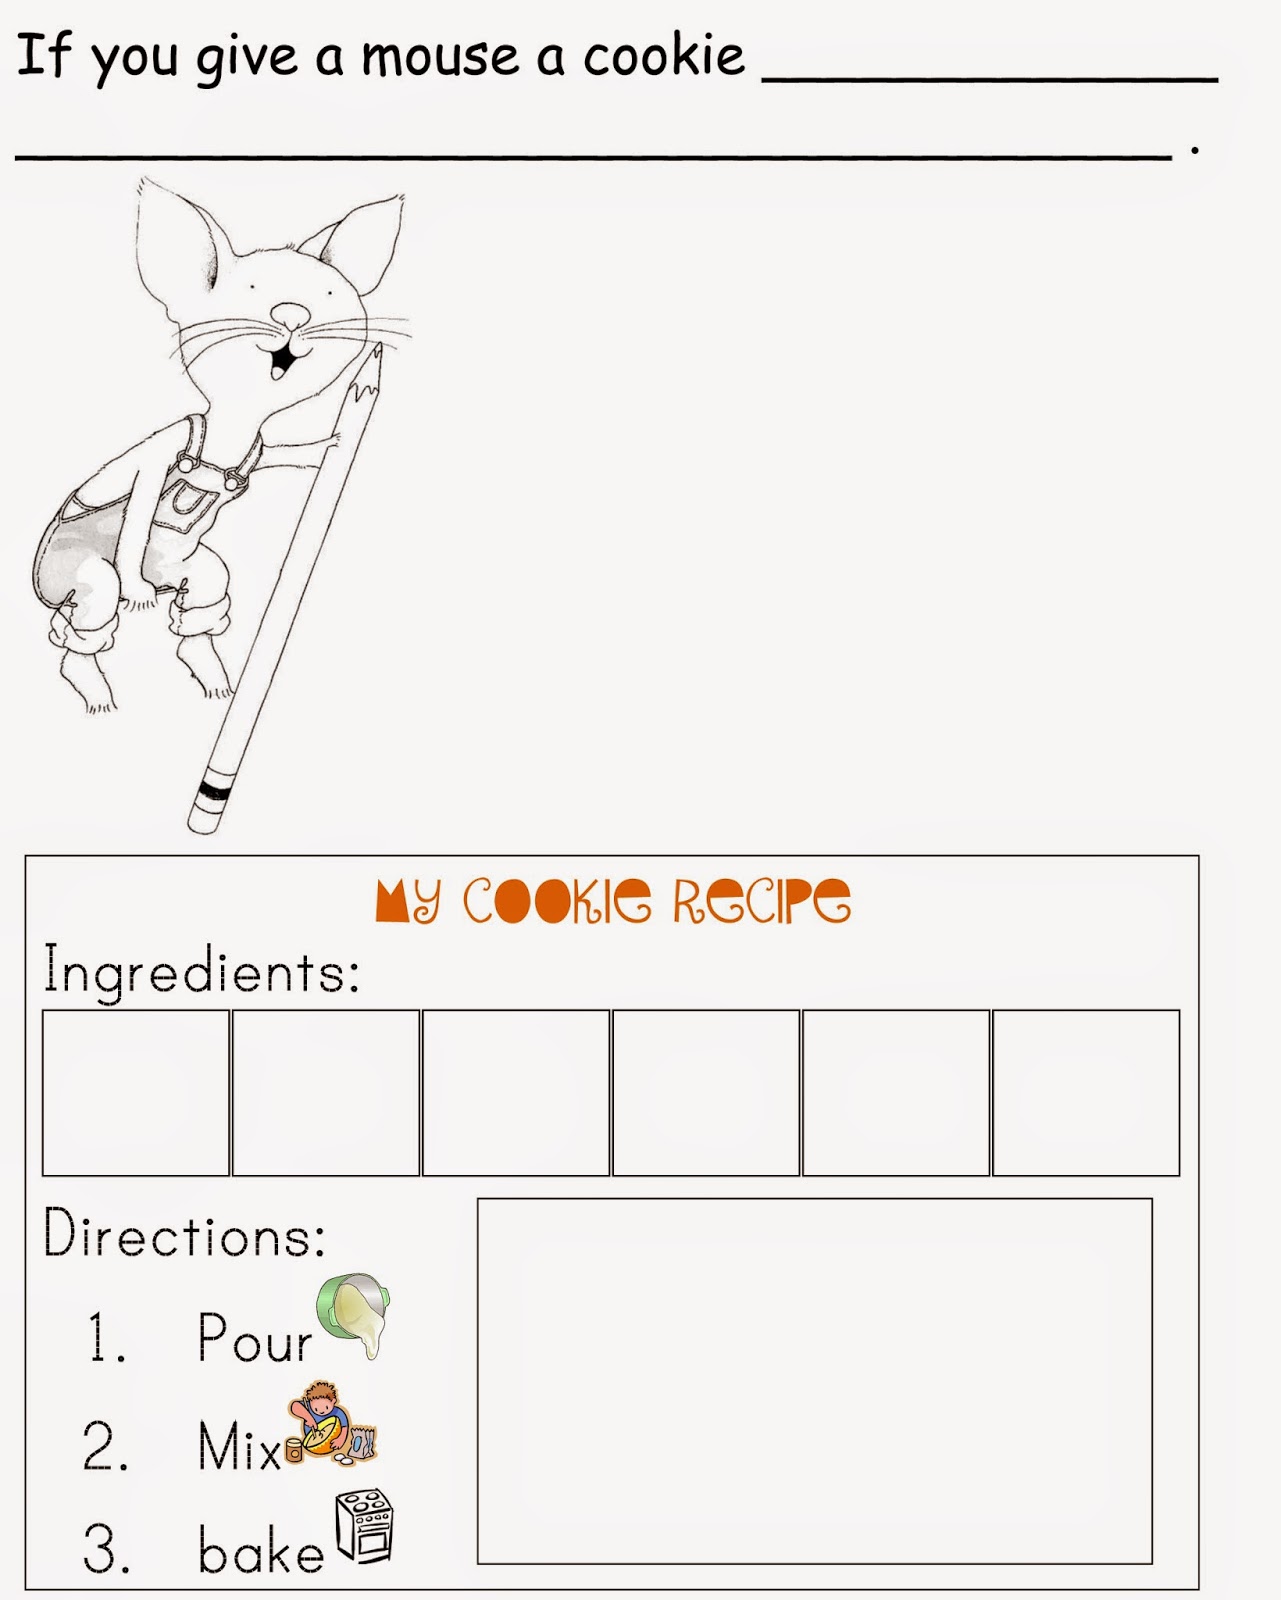 Inspiration Organization If You Give a Mouse a Cookie Worksheets